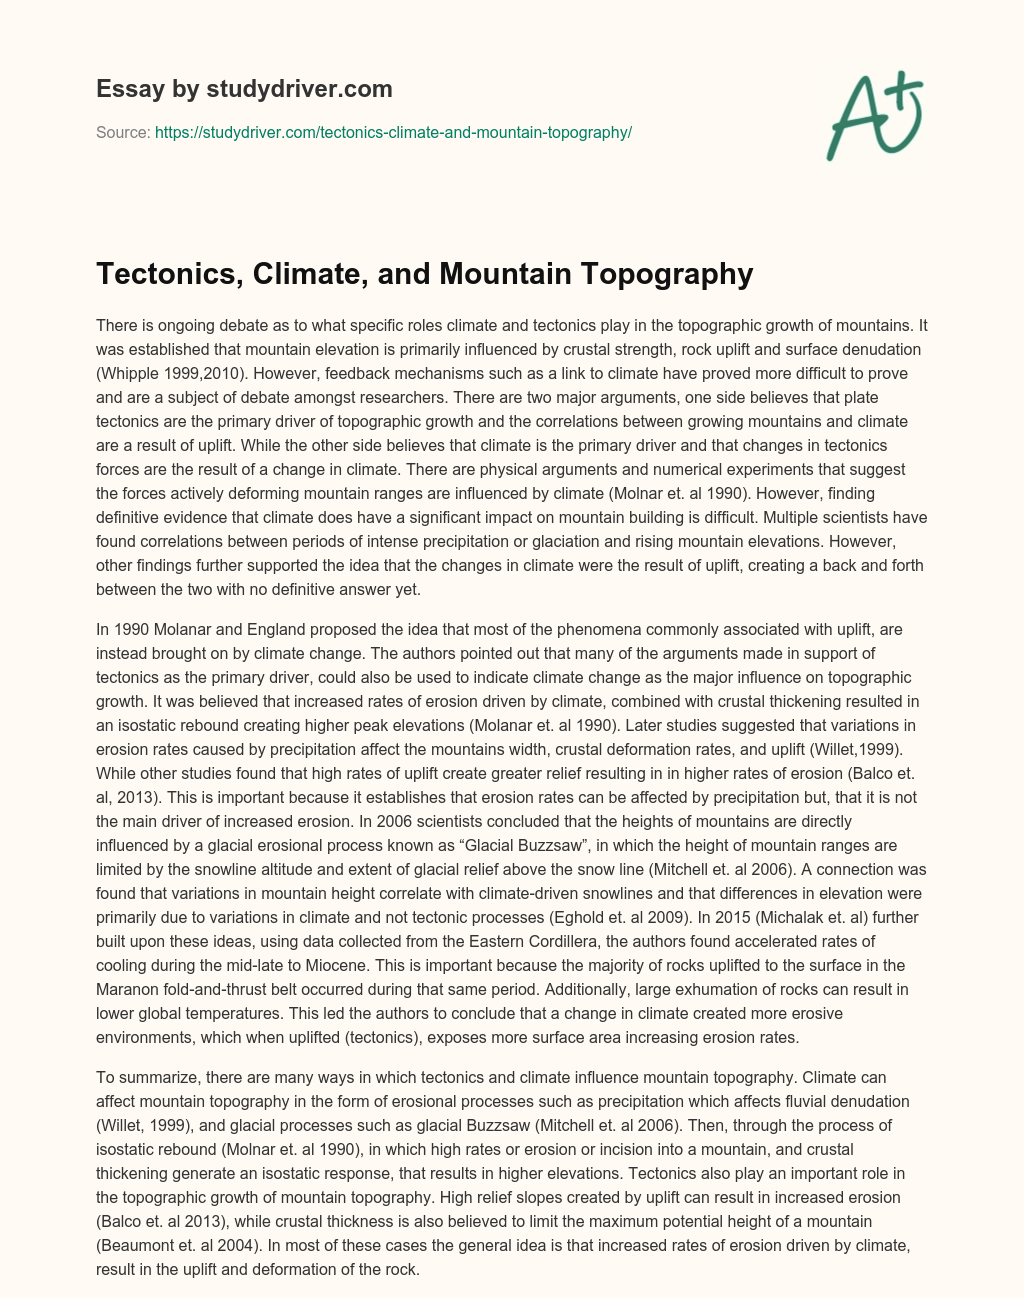 Tectonics, Climate, and Mountain Topography essay